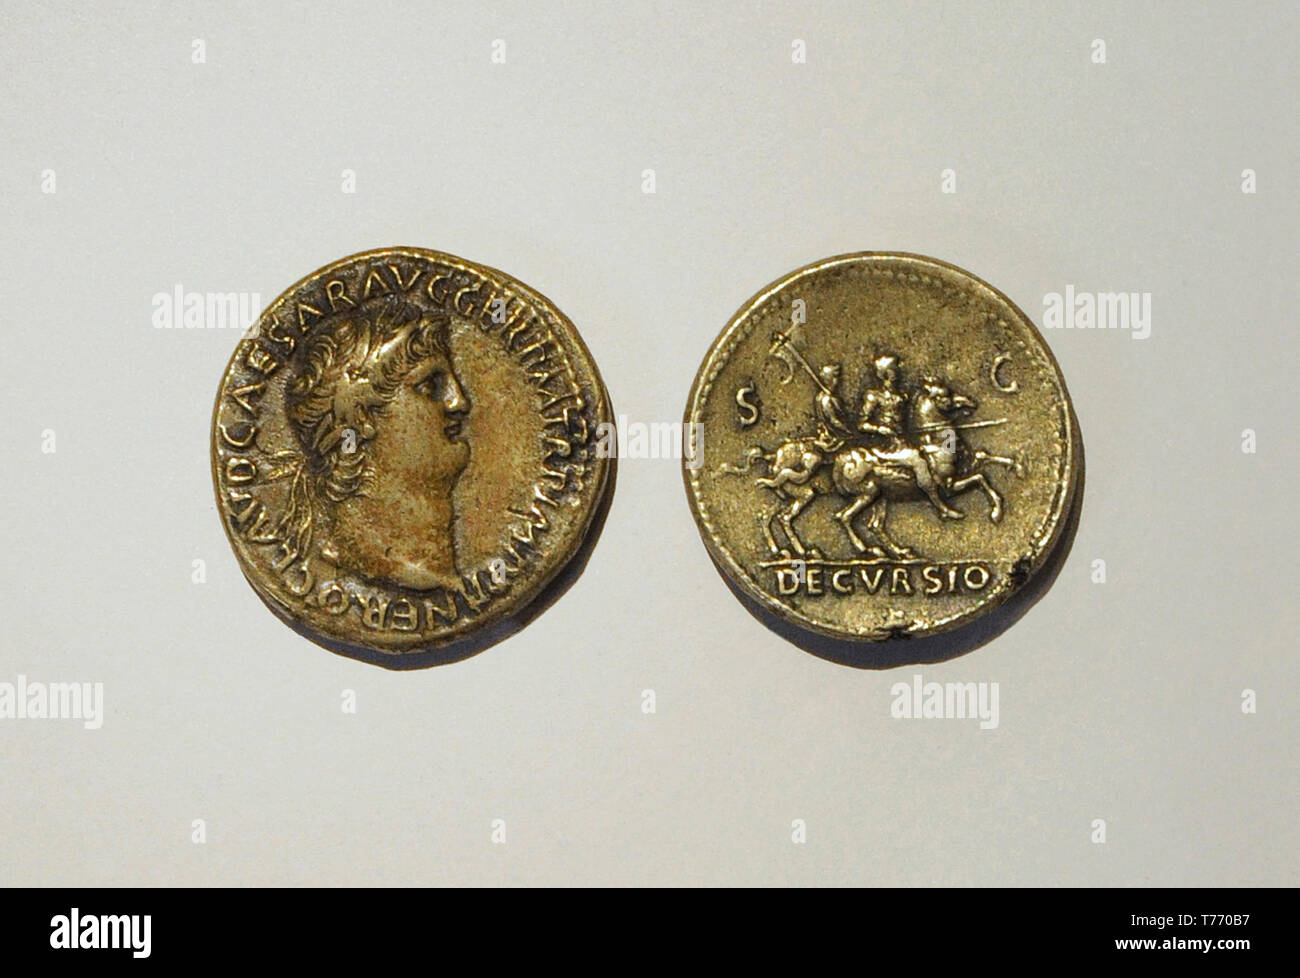 Sestertii coined by Nero. Left, 65 AD, bronze. Right, 64 AD, brass (orichalcum). From Rome (Italy). National Archaeological Museum. Madrid. Spain. Stock Photo